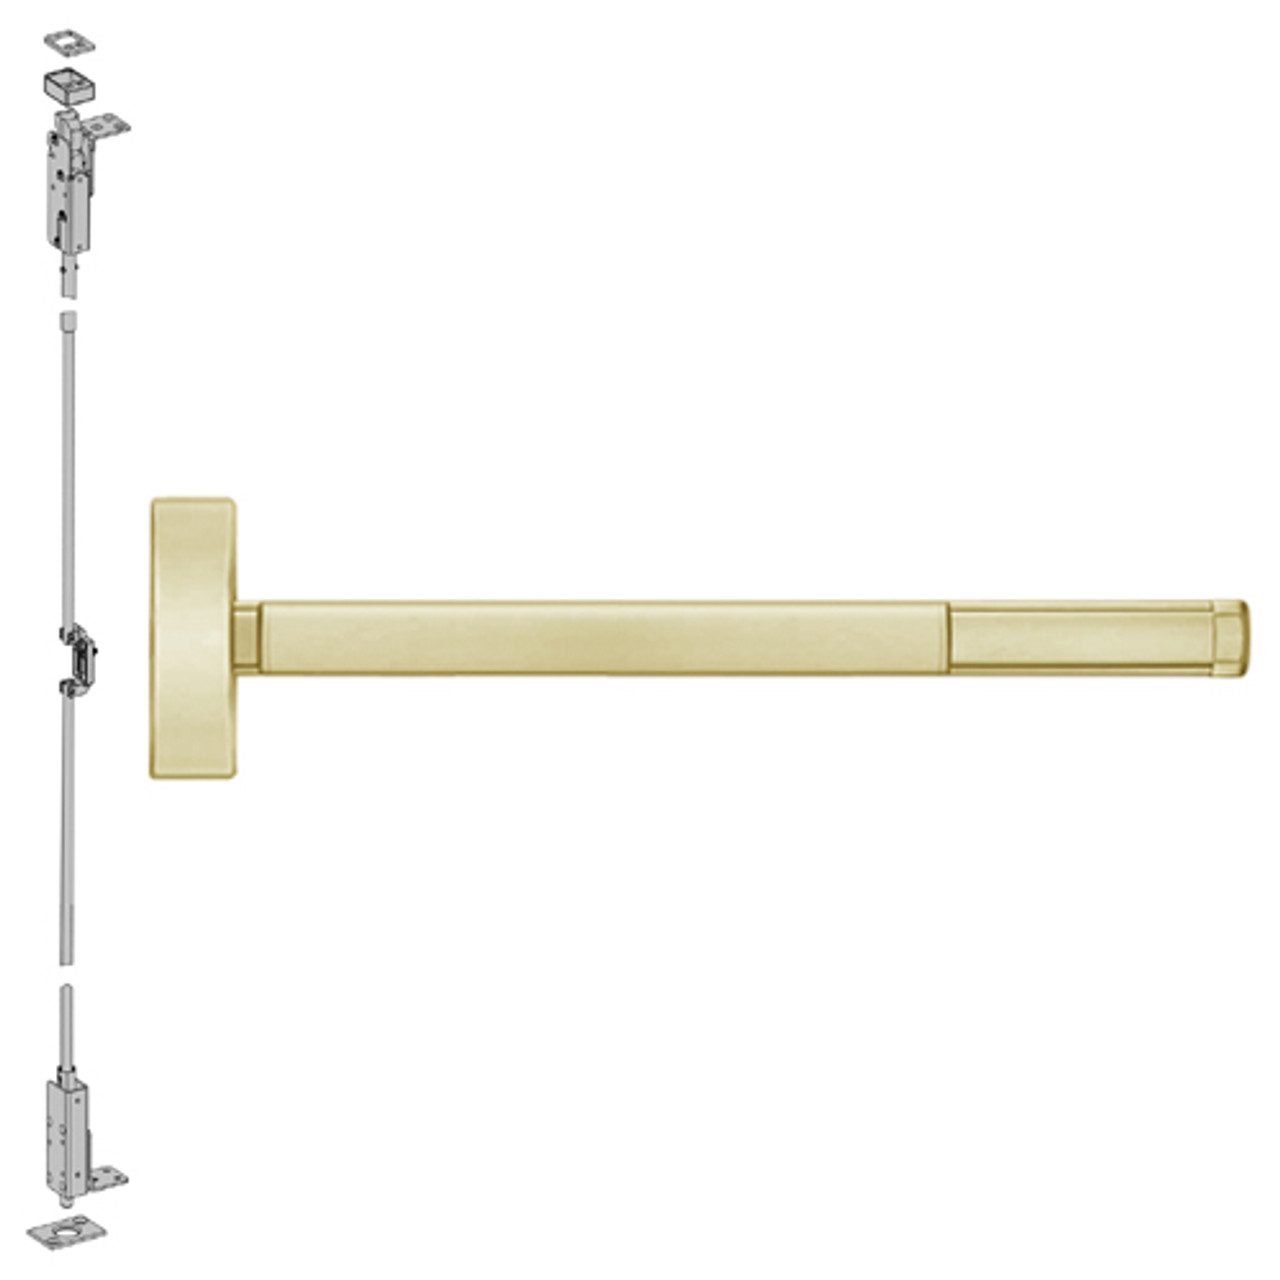 TS2703LBR-606-48 PHI 2700 Series Wood Door Concealed Vertical Exit Device with Touchbar Monitoring Switch Prepped for Key Retracts Latchbolt in Satin Brass Finish